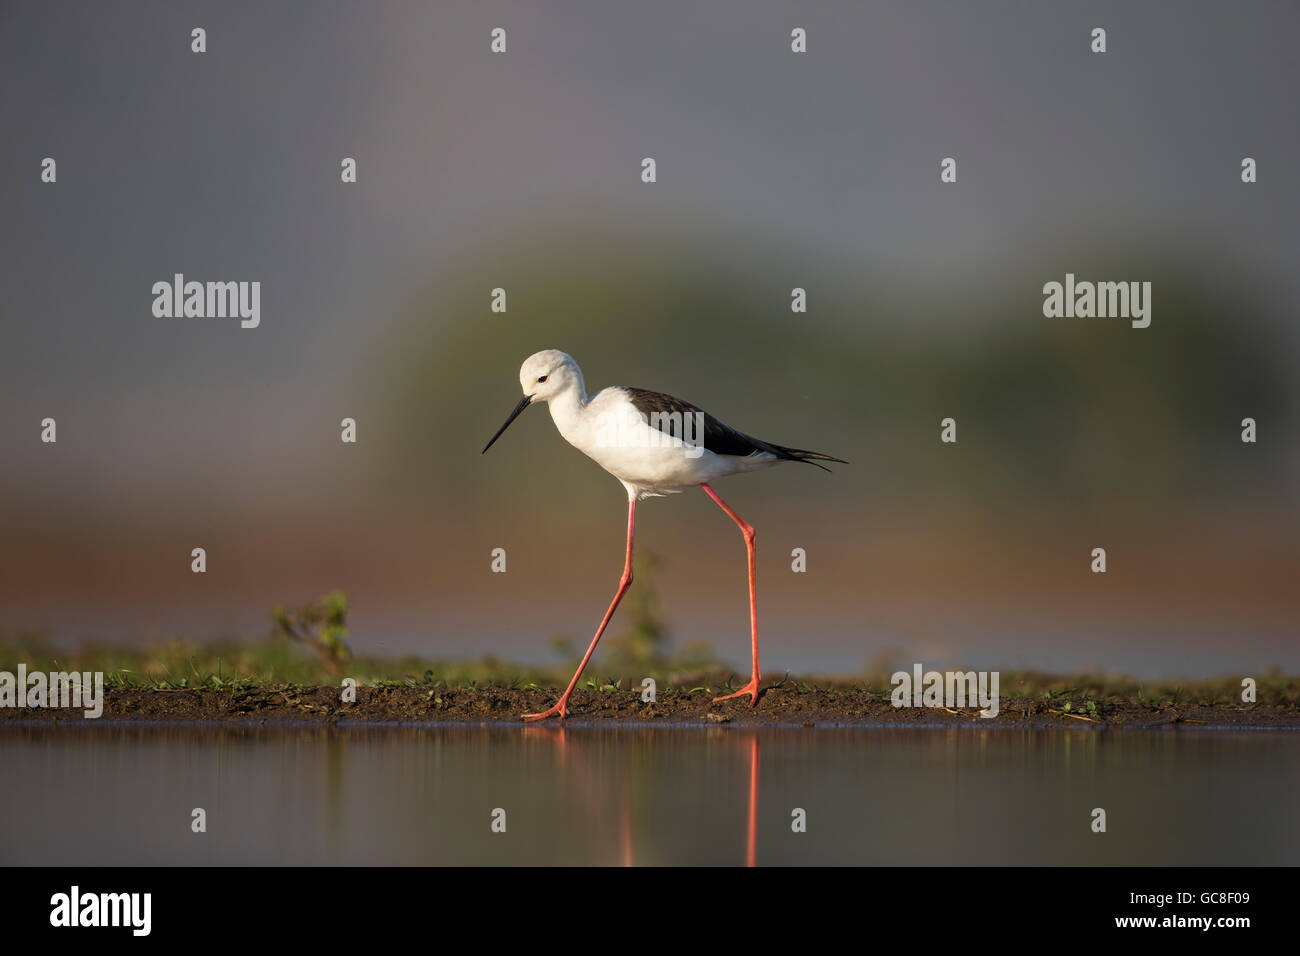 Black-winged stilt Himantopus himantopus at the edge of a lagoon showing distinct long red legs and thin black bill Stock Photo